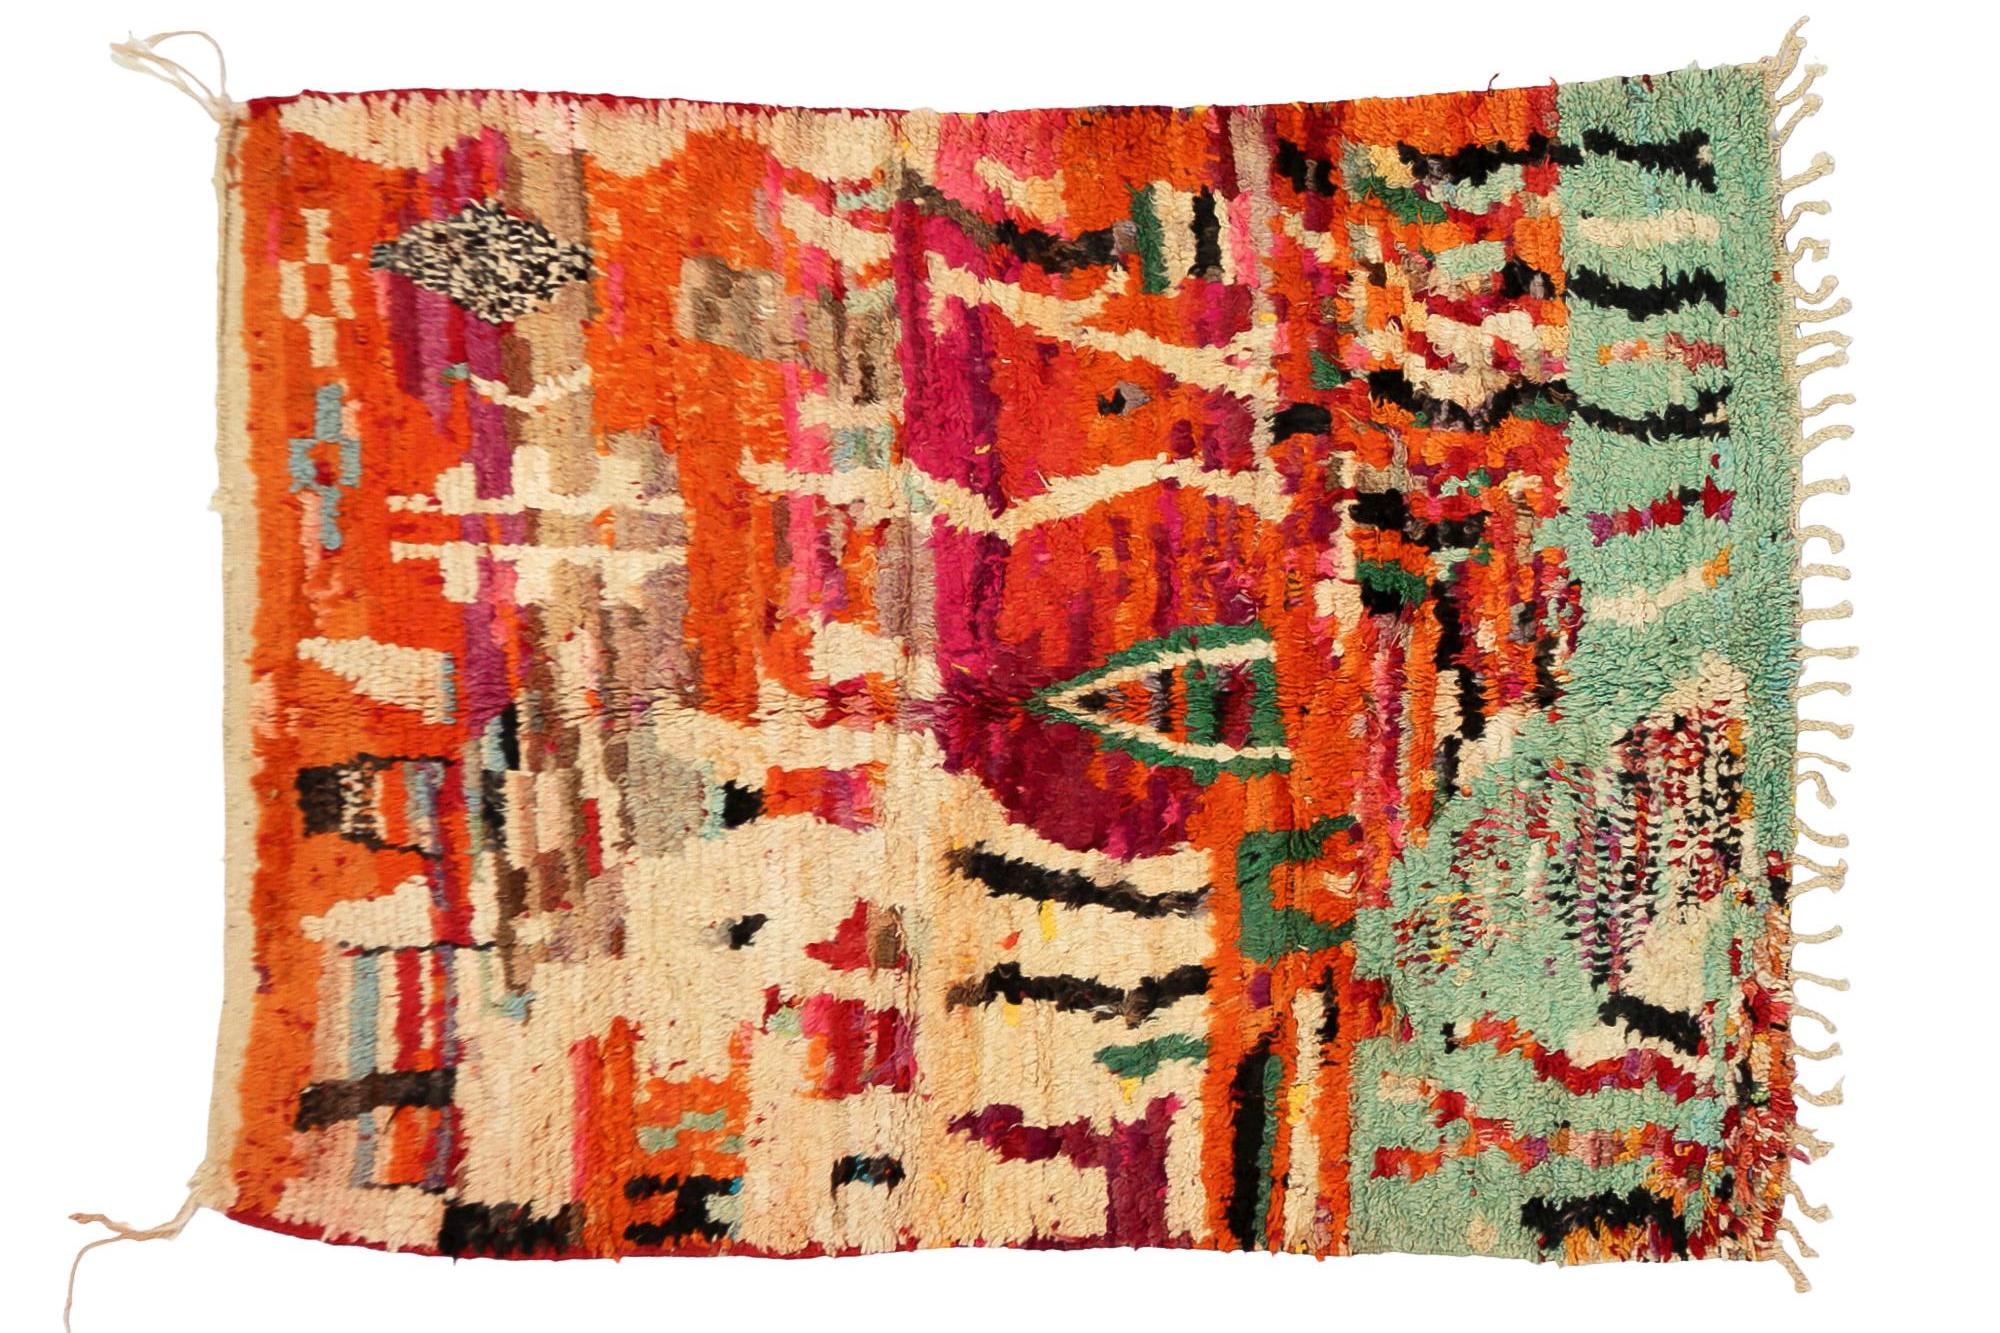 Boujaad rug comes from the El Haouz region in the Middle Atlas in Morocco. There is no modern weaving equipment, carpets are made manually by very talented ladies artists in the same way as several centuries ago. The main feature of Boujaad is the